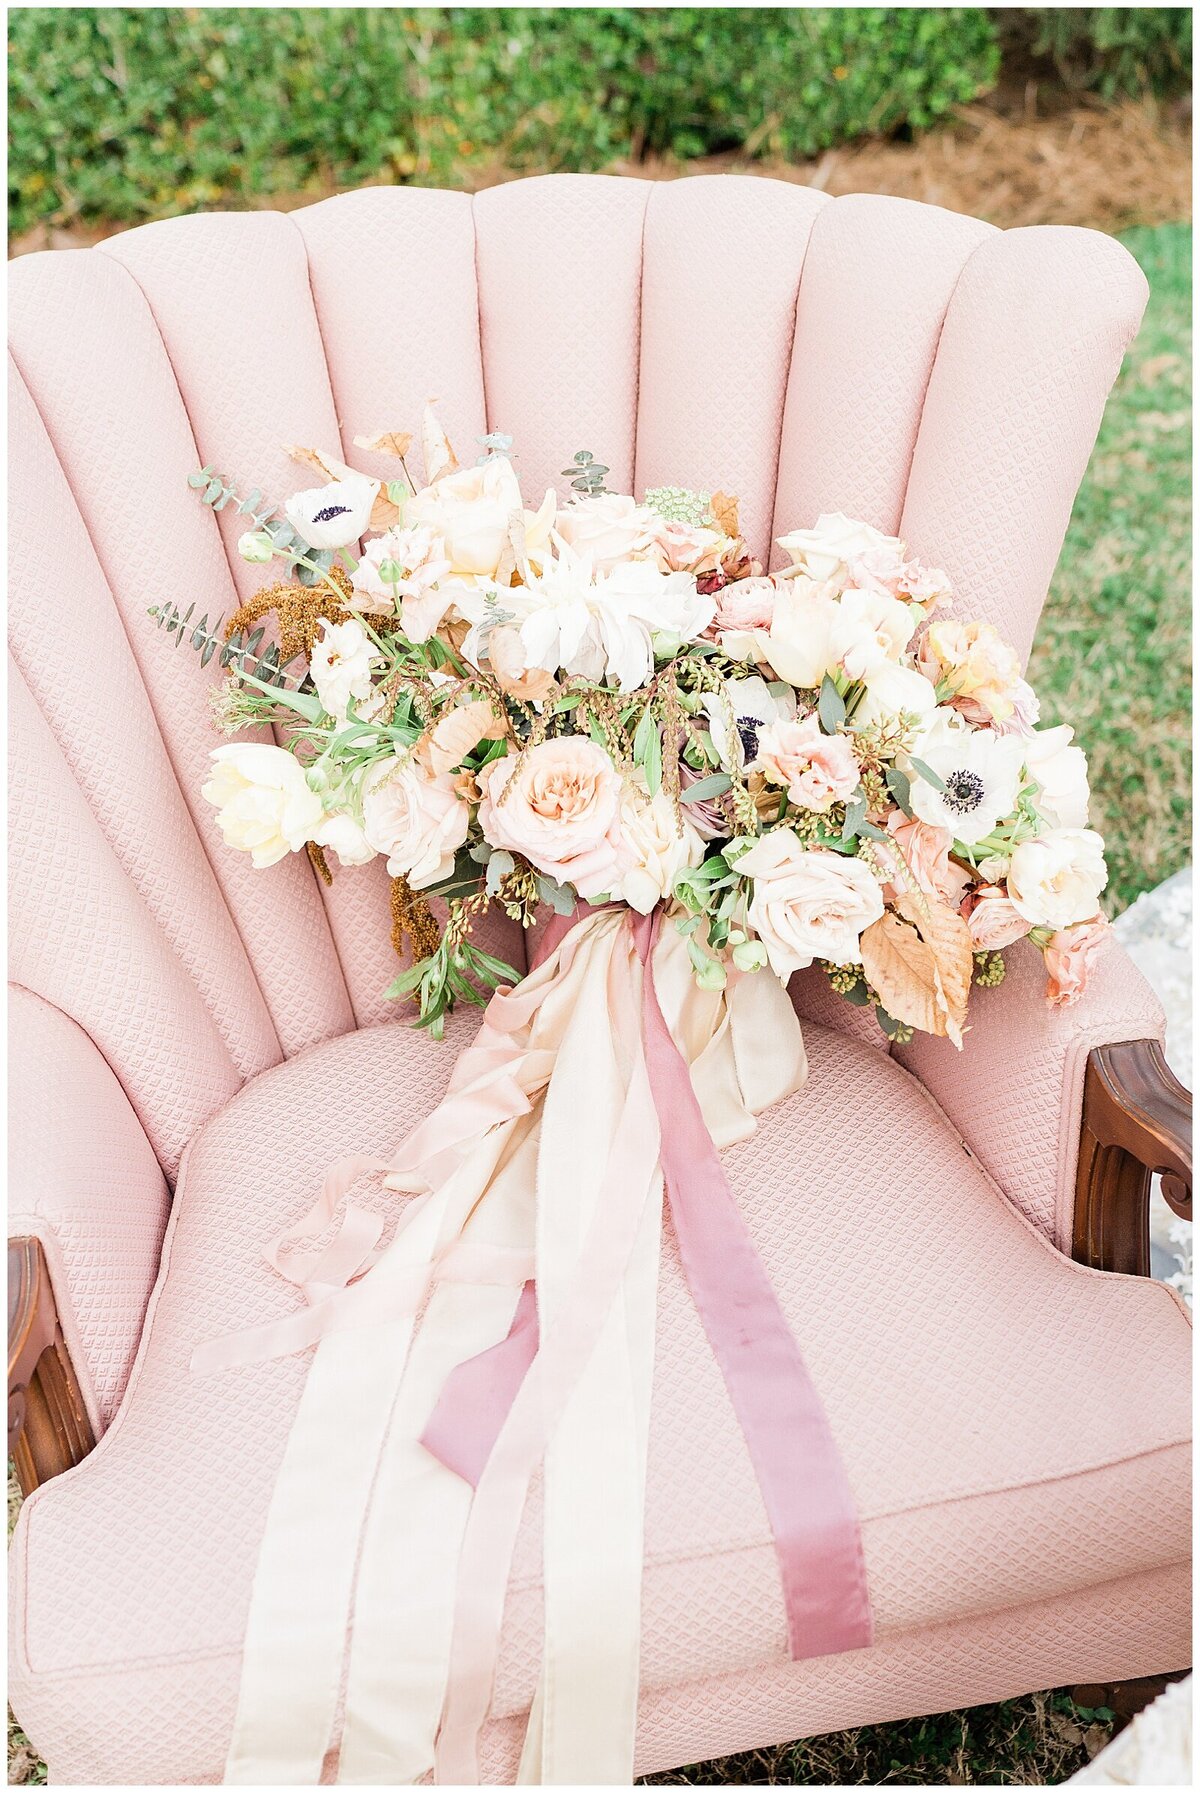 Pink chair with wedding bouquet of white flowers